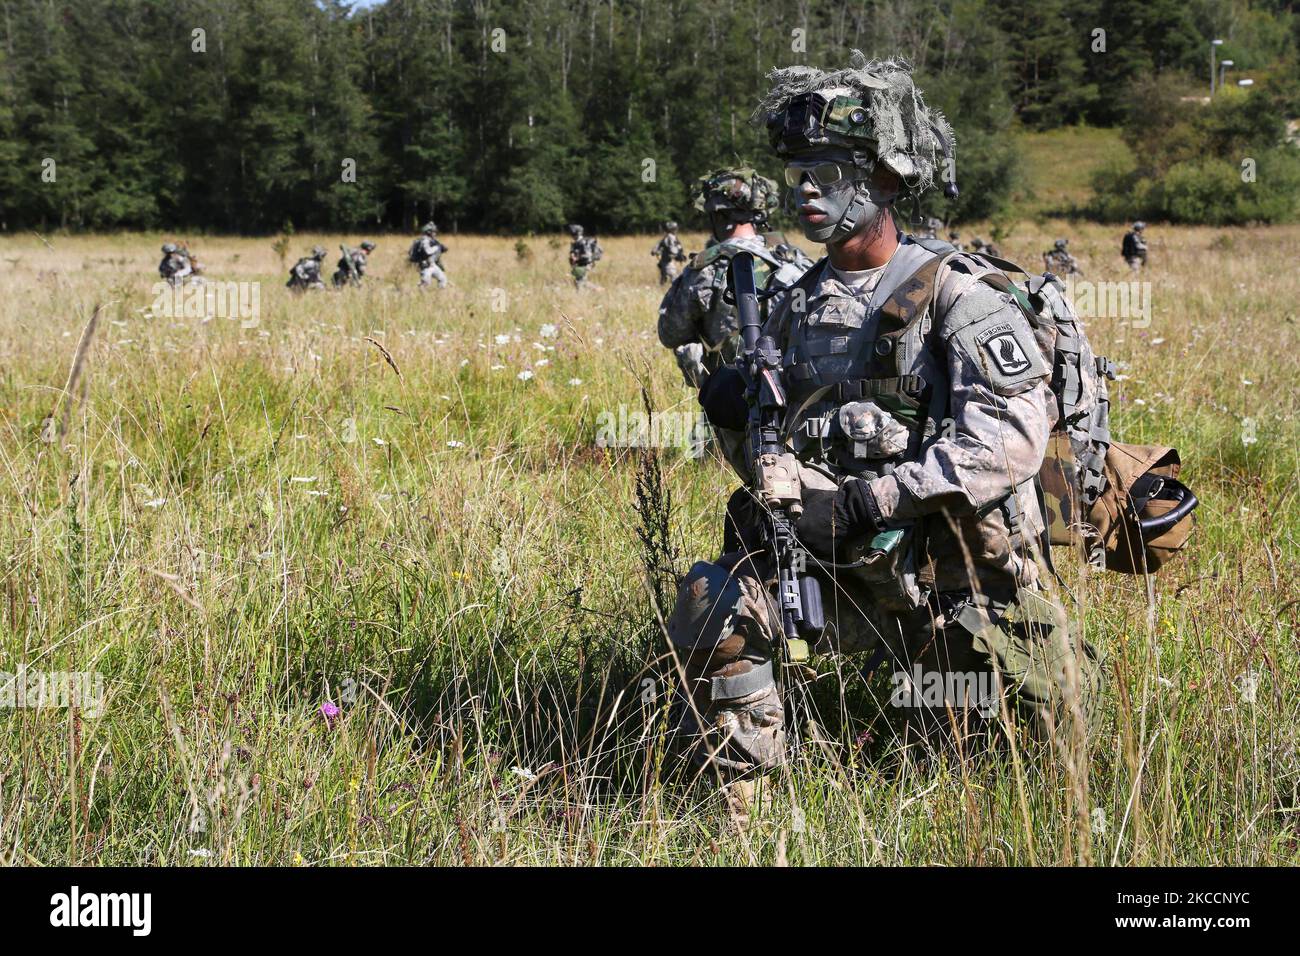 U.S. Army Soldier waits for further instructions during training exercise in Germany. Stock Photo